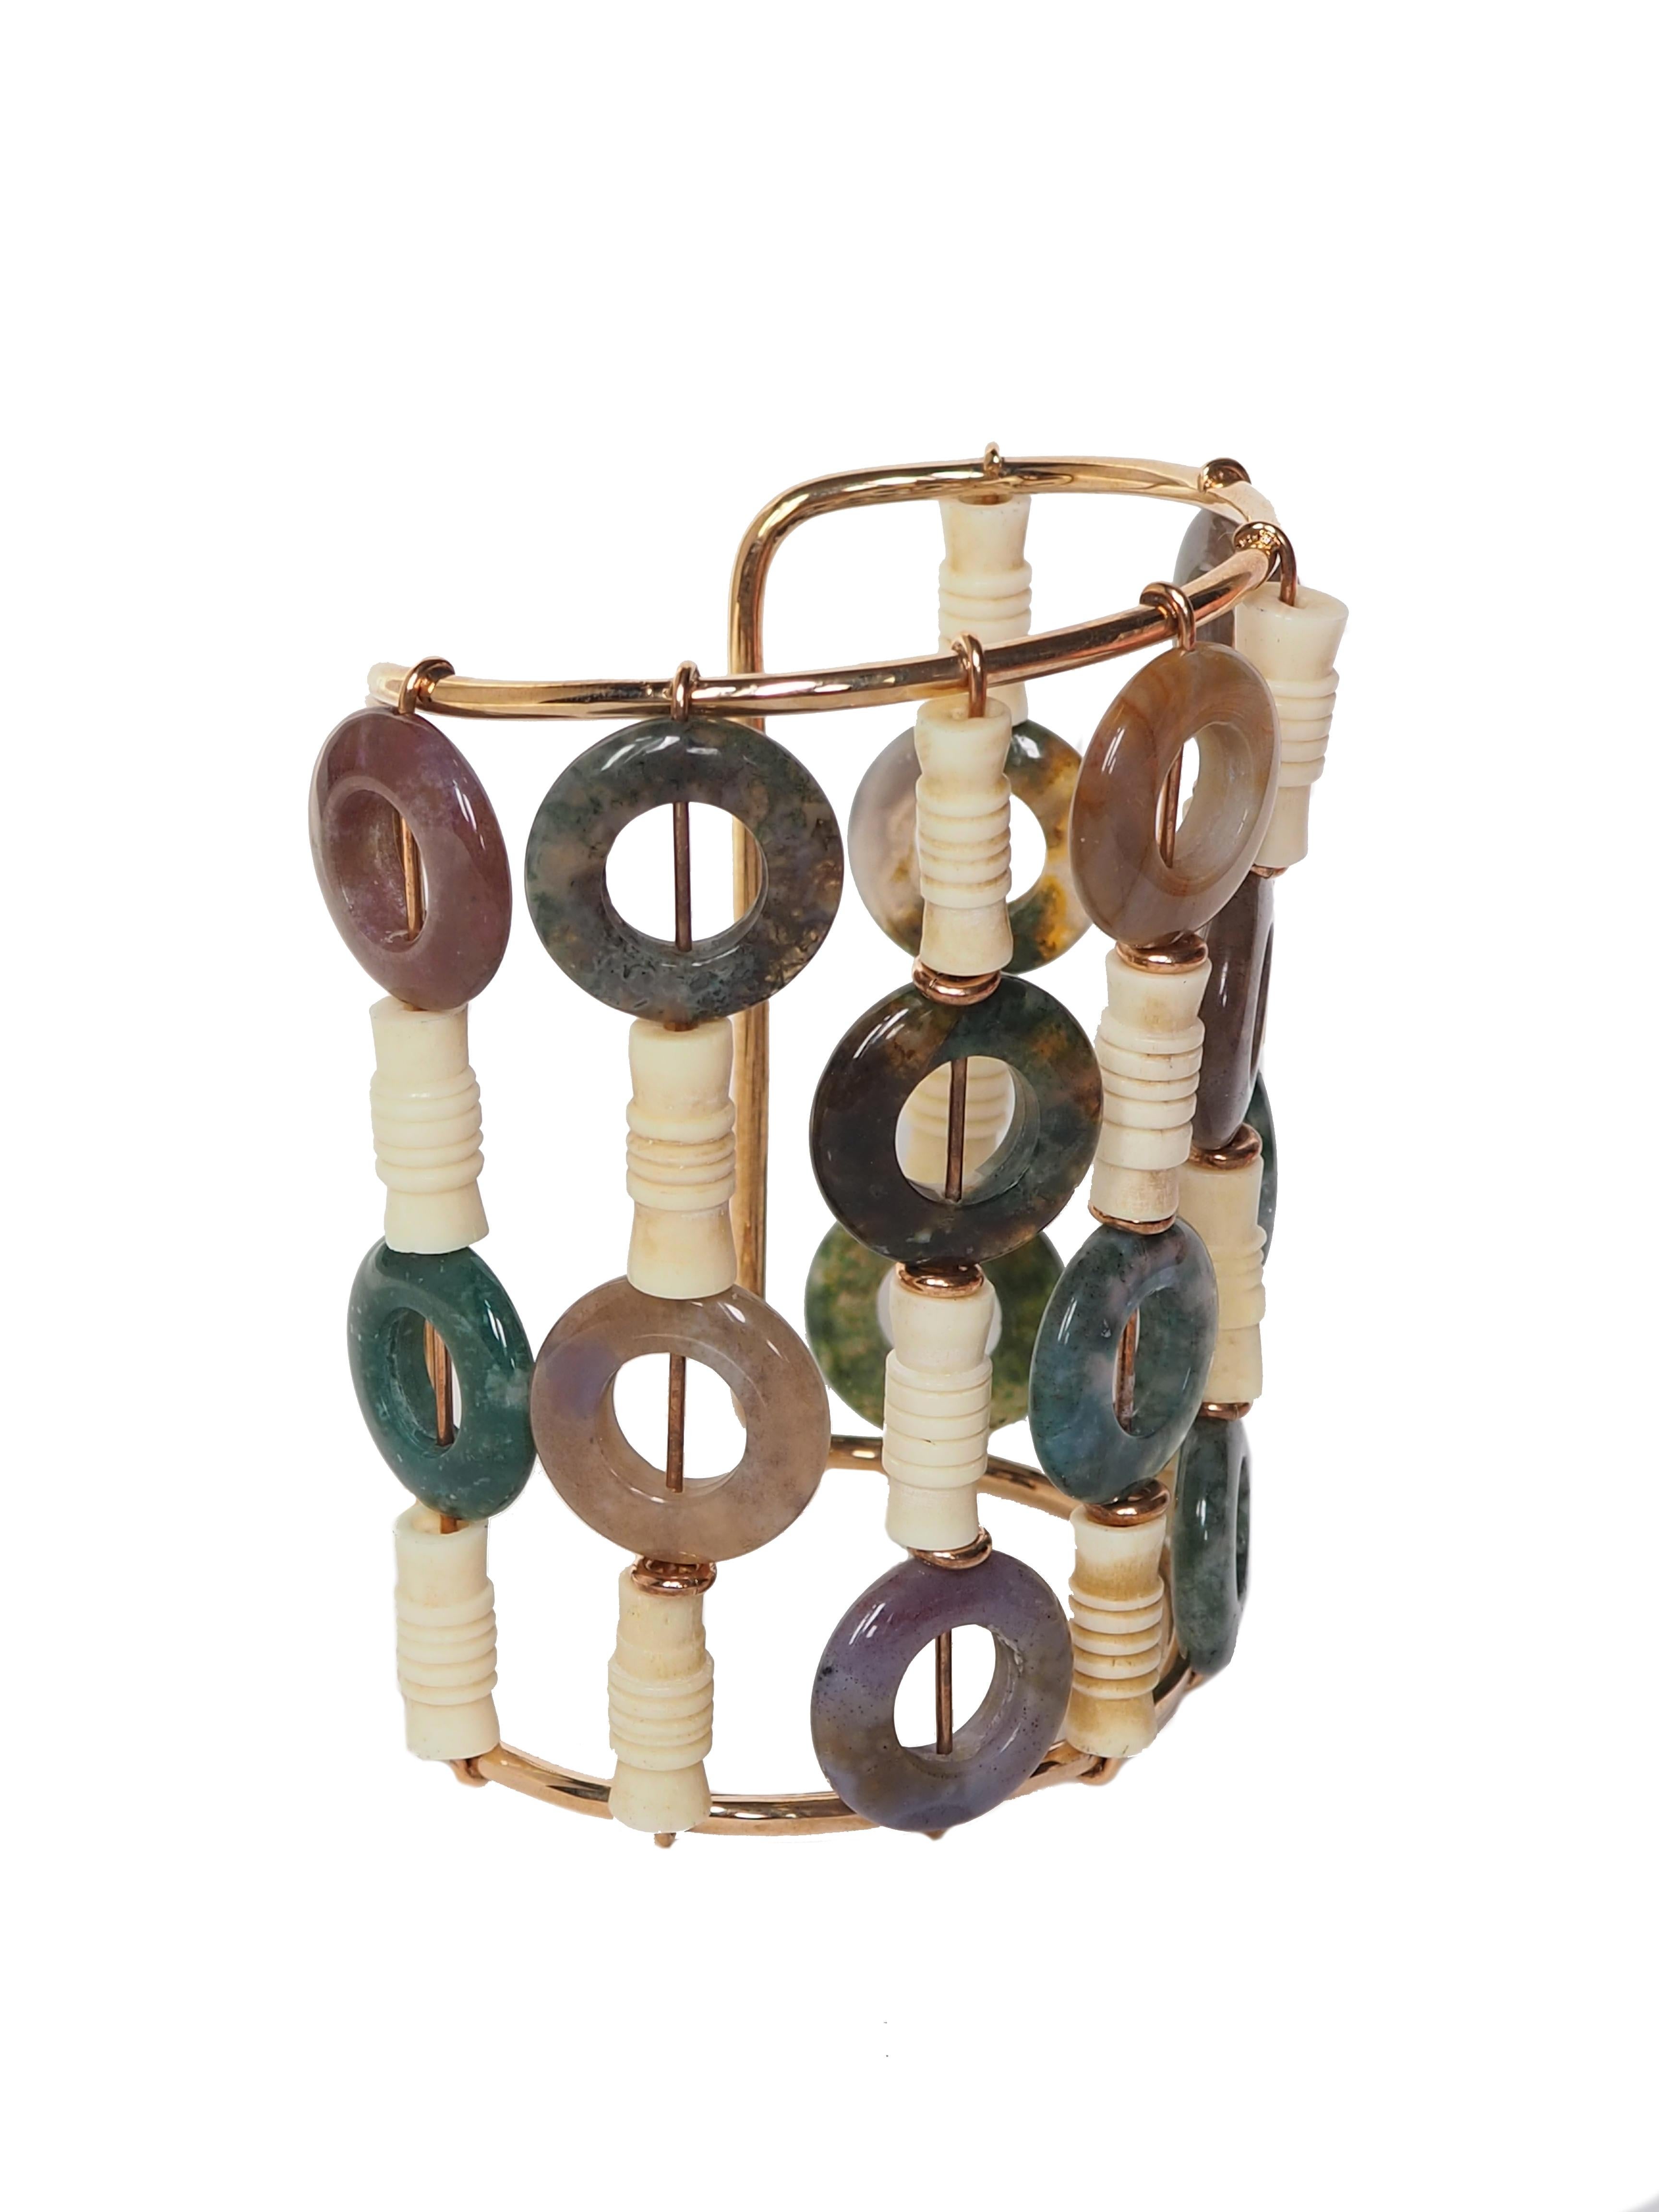 Very nice big bangle with jasper and Carved bone elements bronze linked. Hight cm 8,5.
All Giulia Colussi jewelry is new and has never been previously owned or worn. Each item will arrive at your door beautifully gift wrapped in our boxes, put